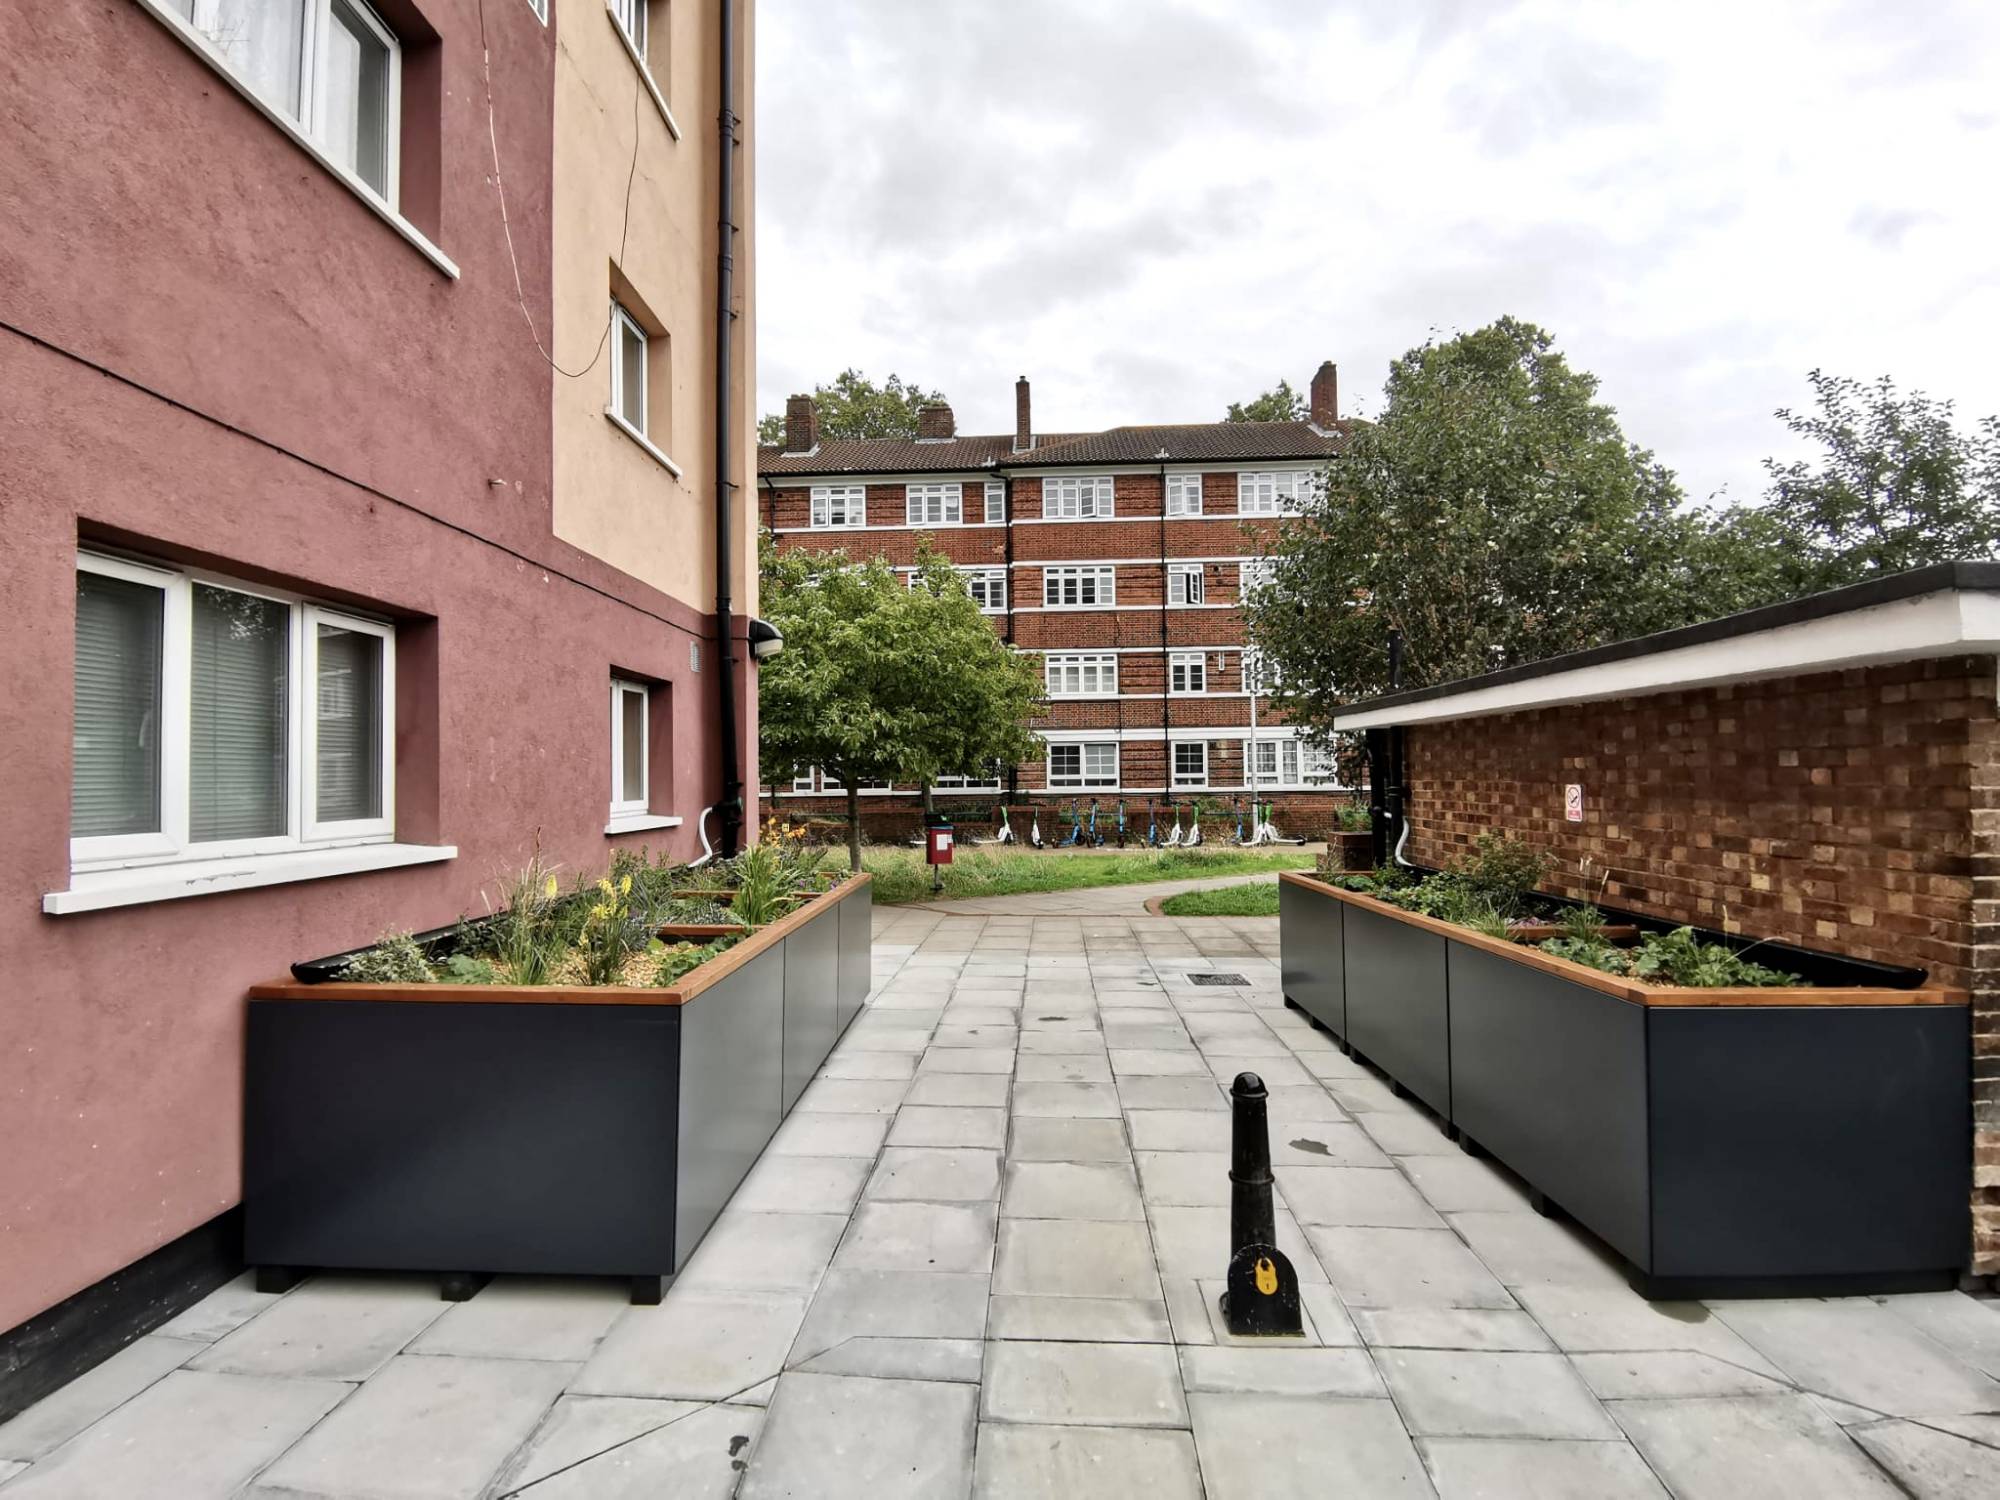 AquaPlanter - Sustainable Drainage Systems (SuDS) Planters (Steel)